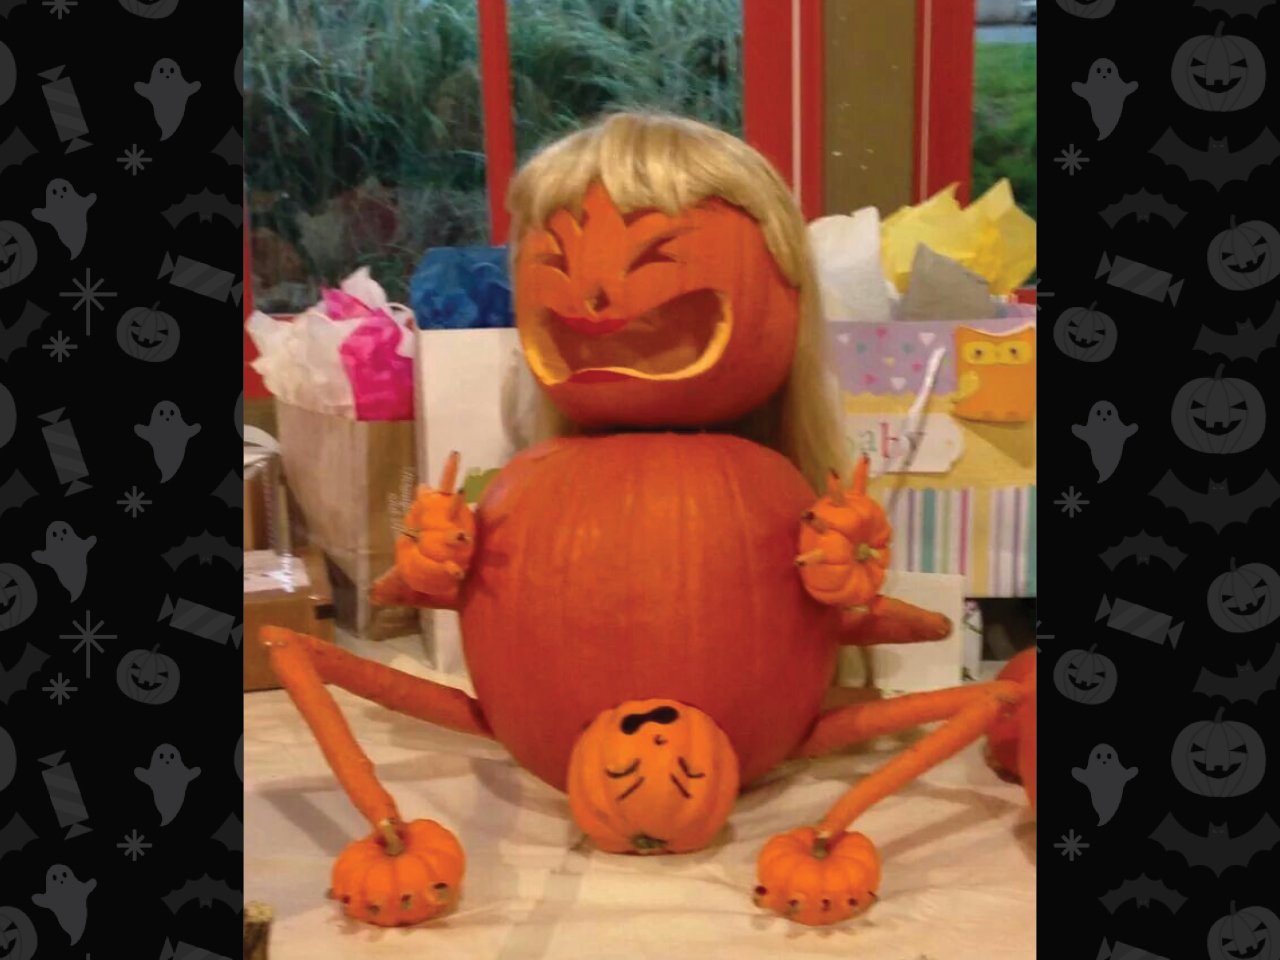 pumpkin carved as pregnant woman wearing a blonde wig and giving birth